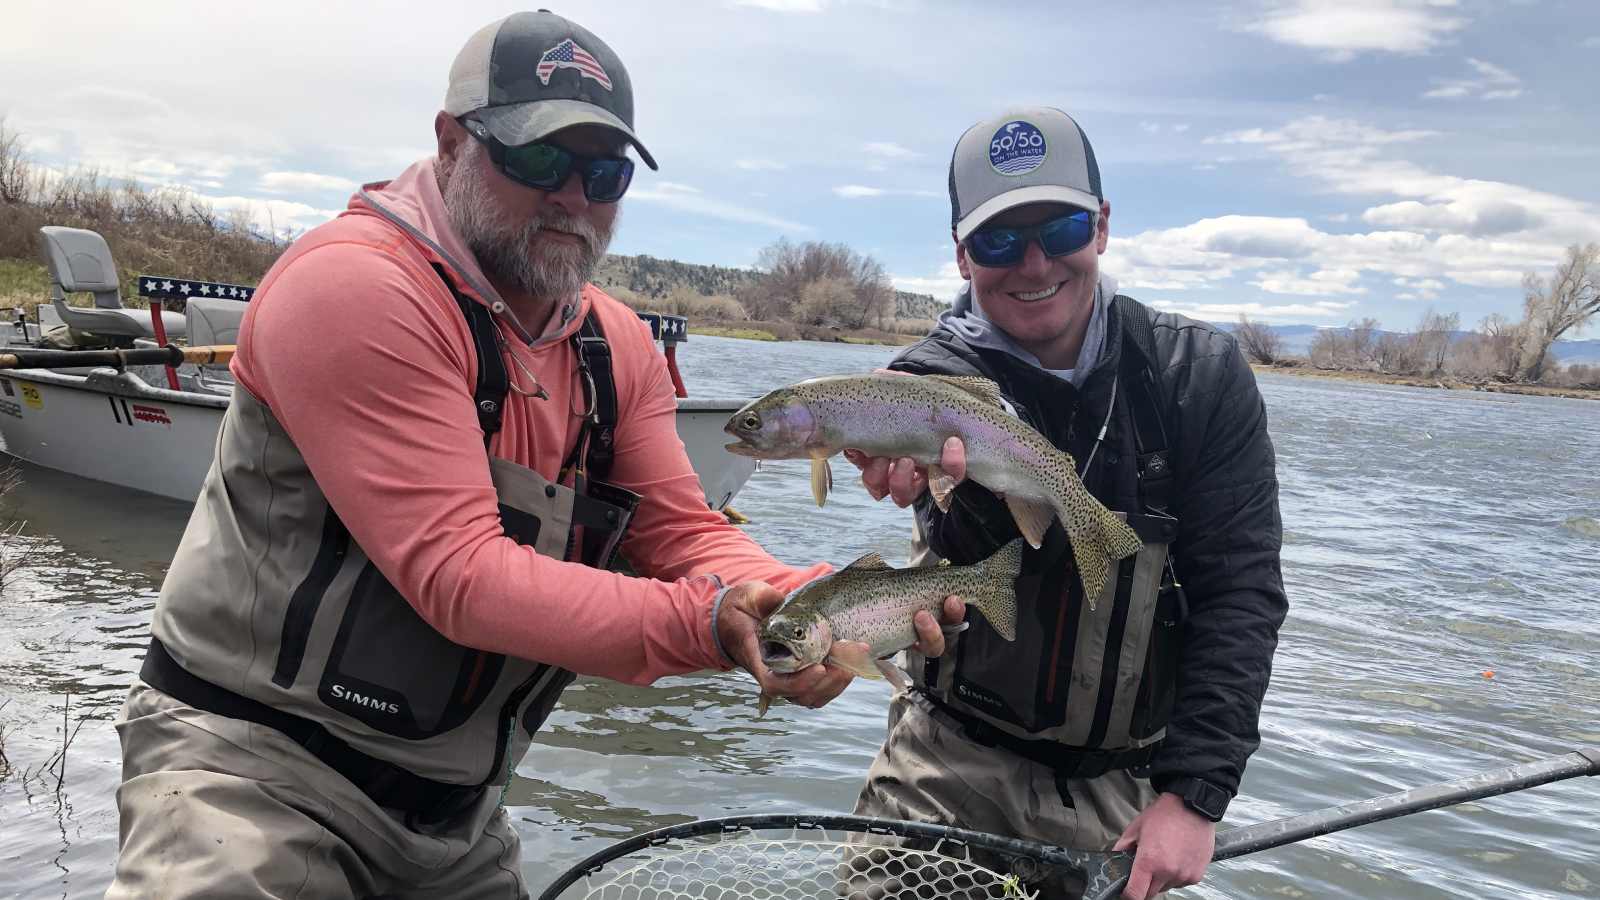 Two men hold fish while standing in a Montana river as a boat floats in the background during a trip with The Tackle Shop.